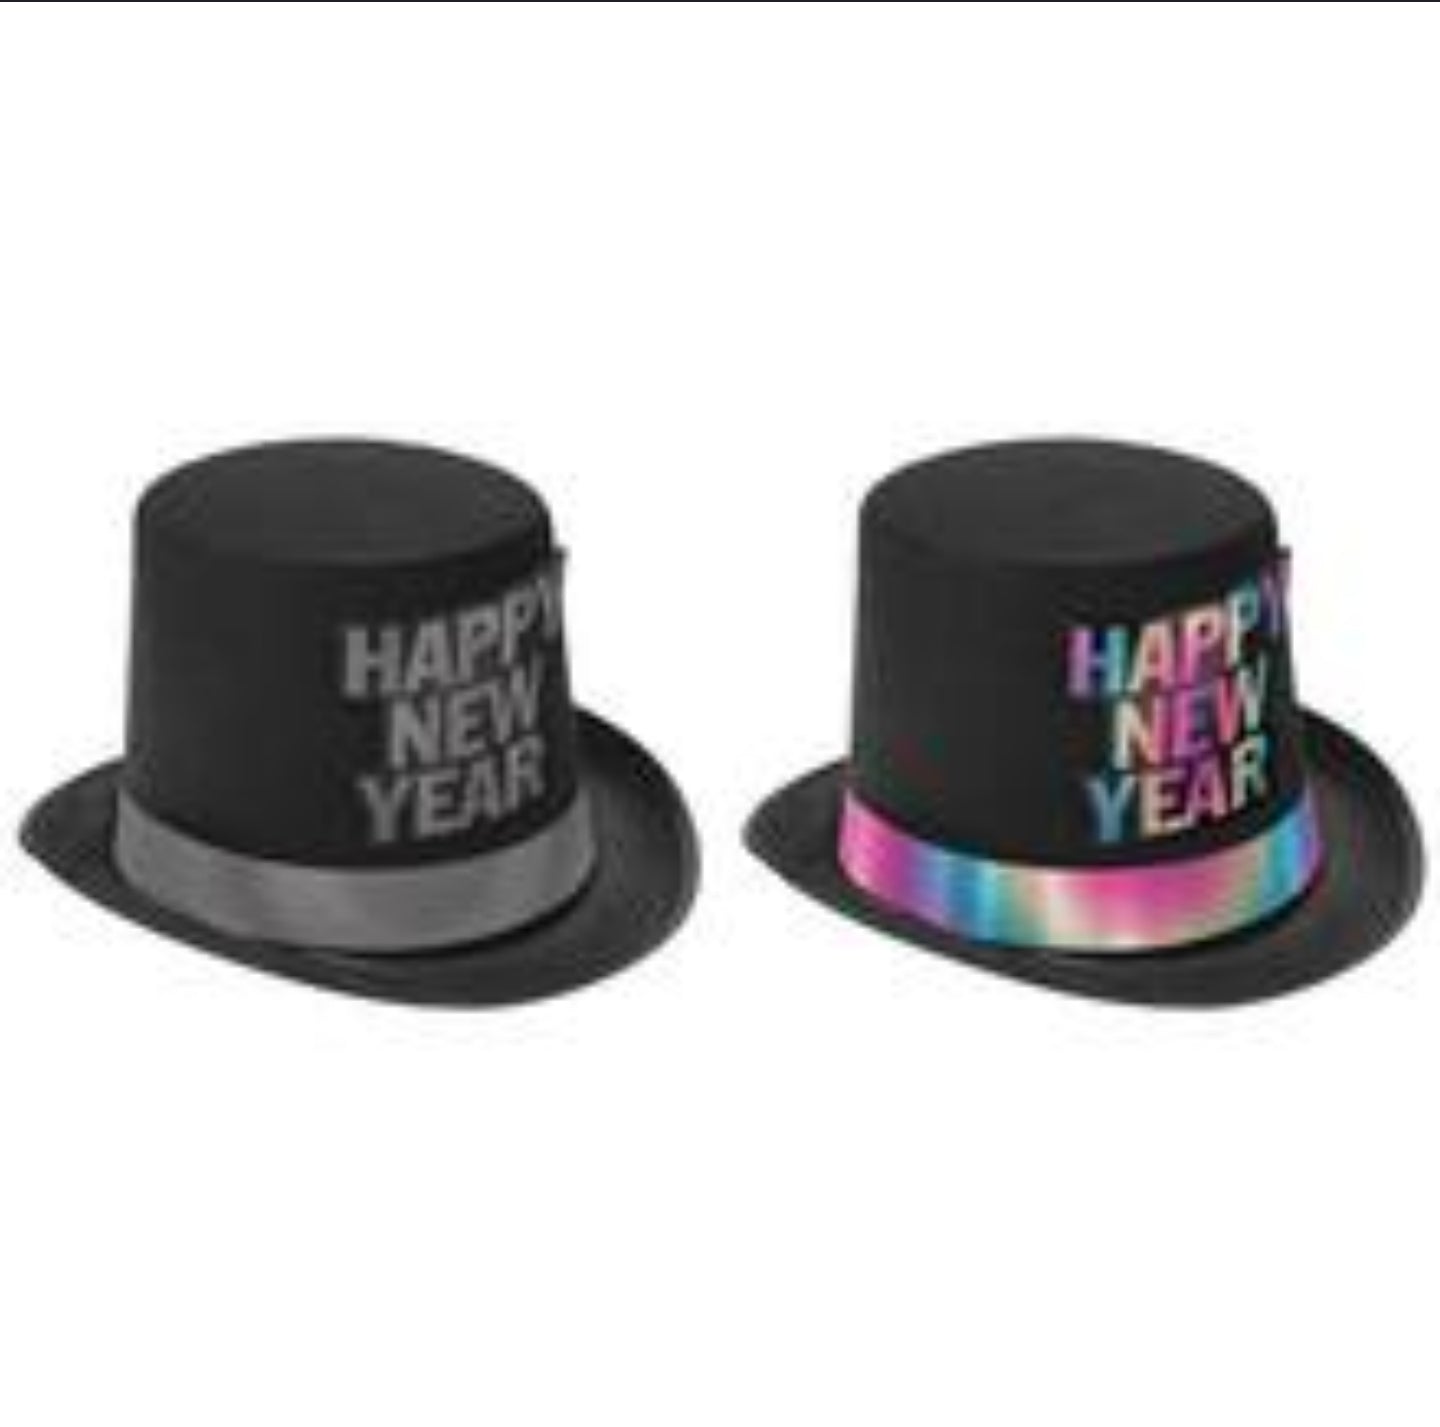 Amscan HOLIDAY: NEW YEAR'S Illuminating Happy New Year Top Hat